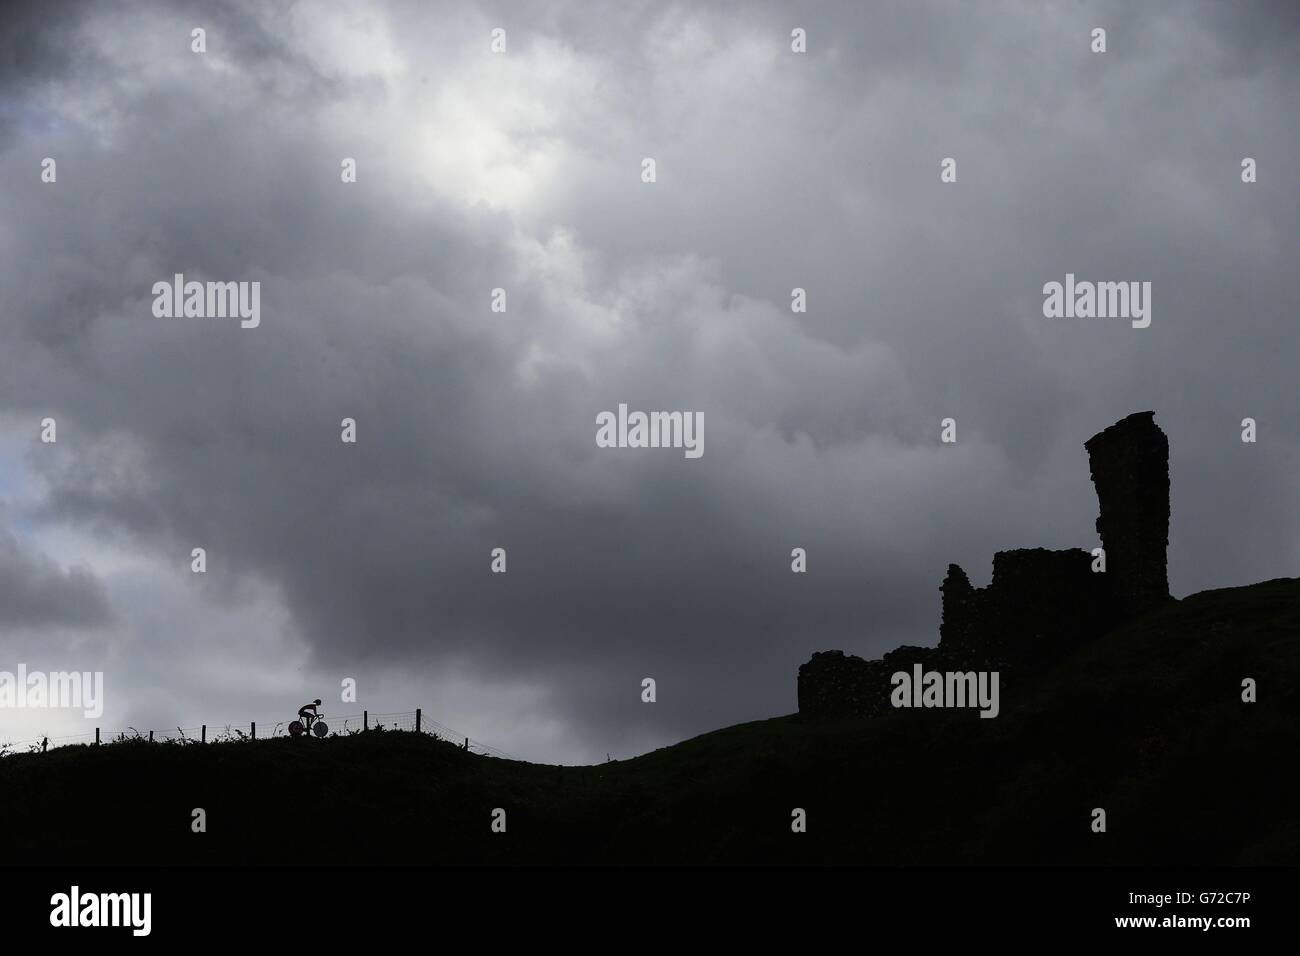 STAND ALONE. A silhouette of a promotional billboard shaped like a cyclist on the route of the Giro D'Italia at Redbay Castle in Co Antrim, Northern Ireland. Stock Photo